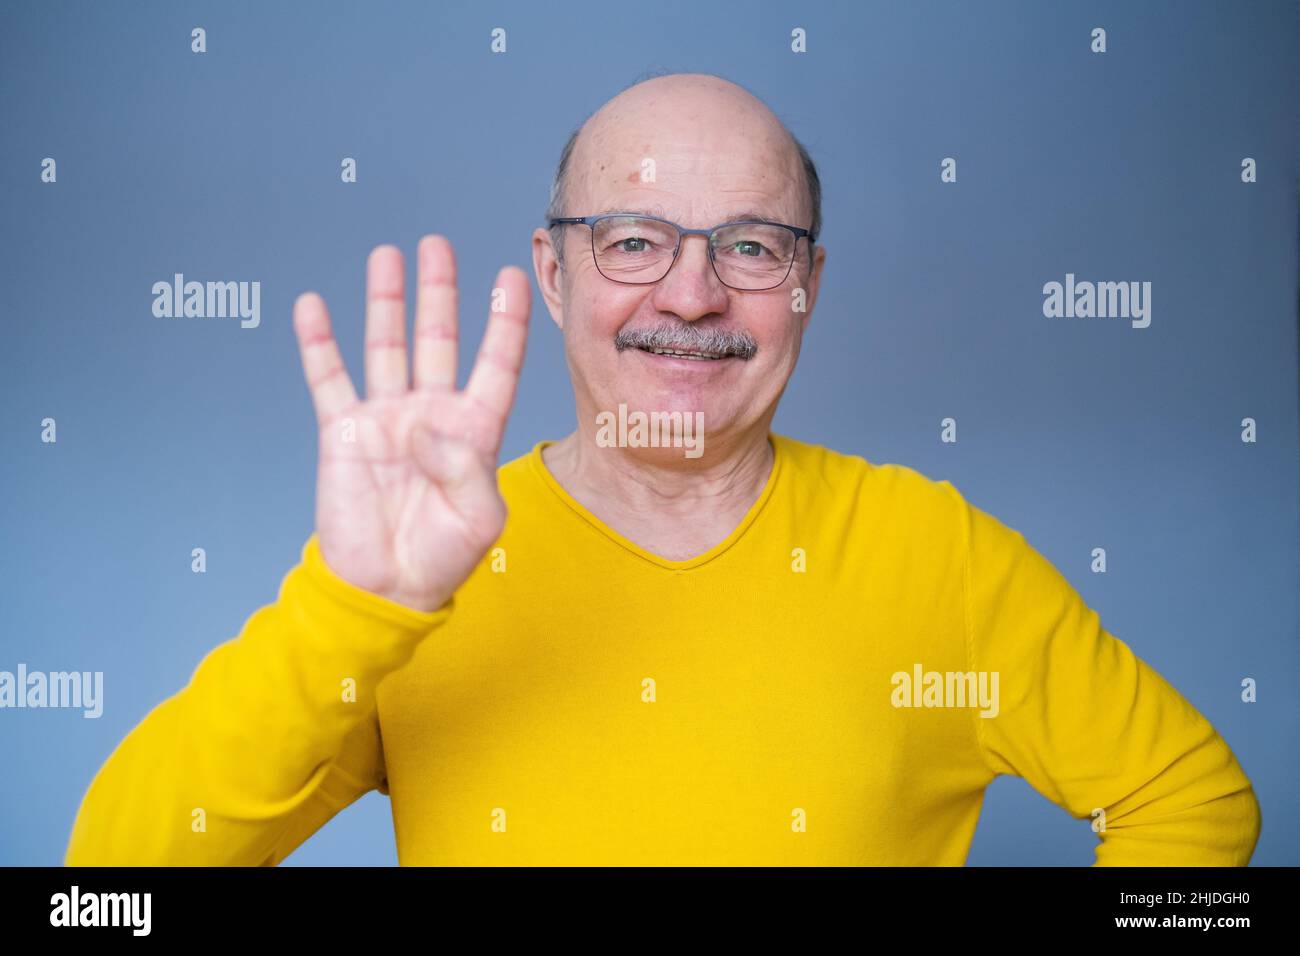 Senior man raising hand, showing number four with fingers, counting something, standing over blue background Stock Photo